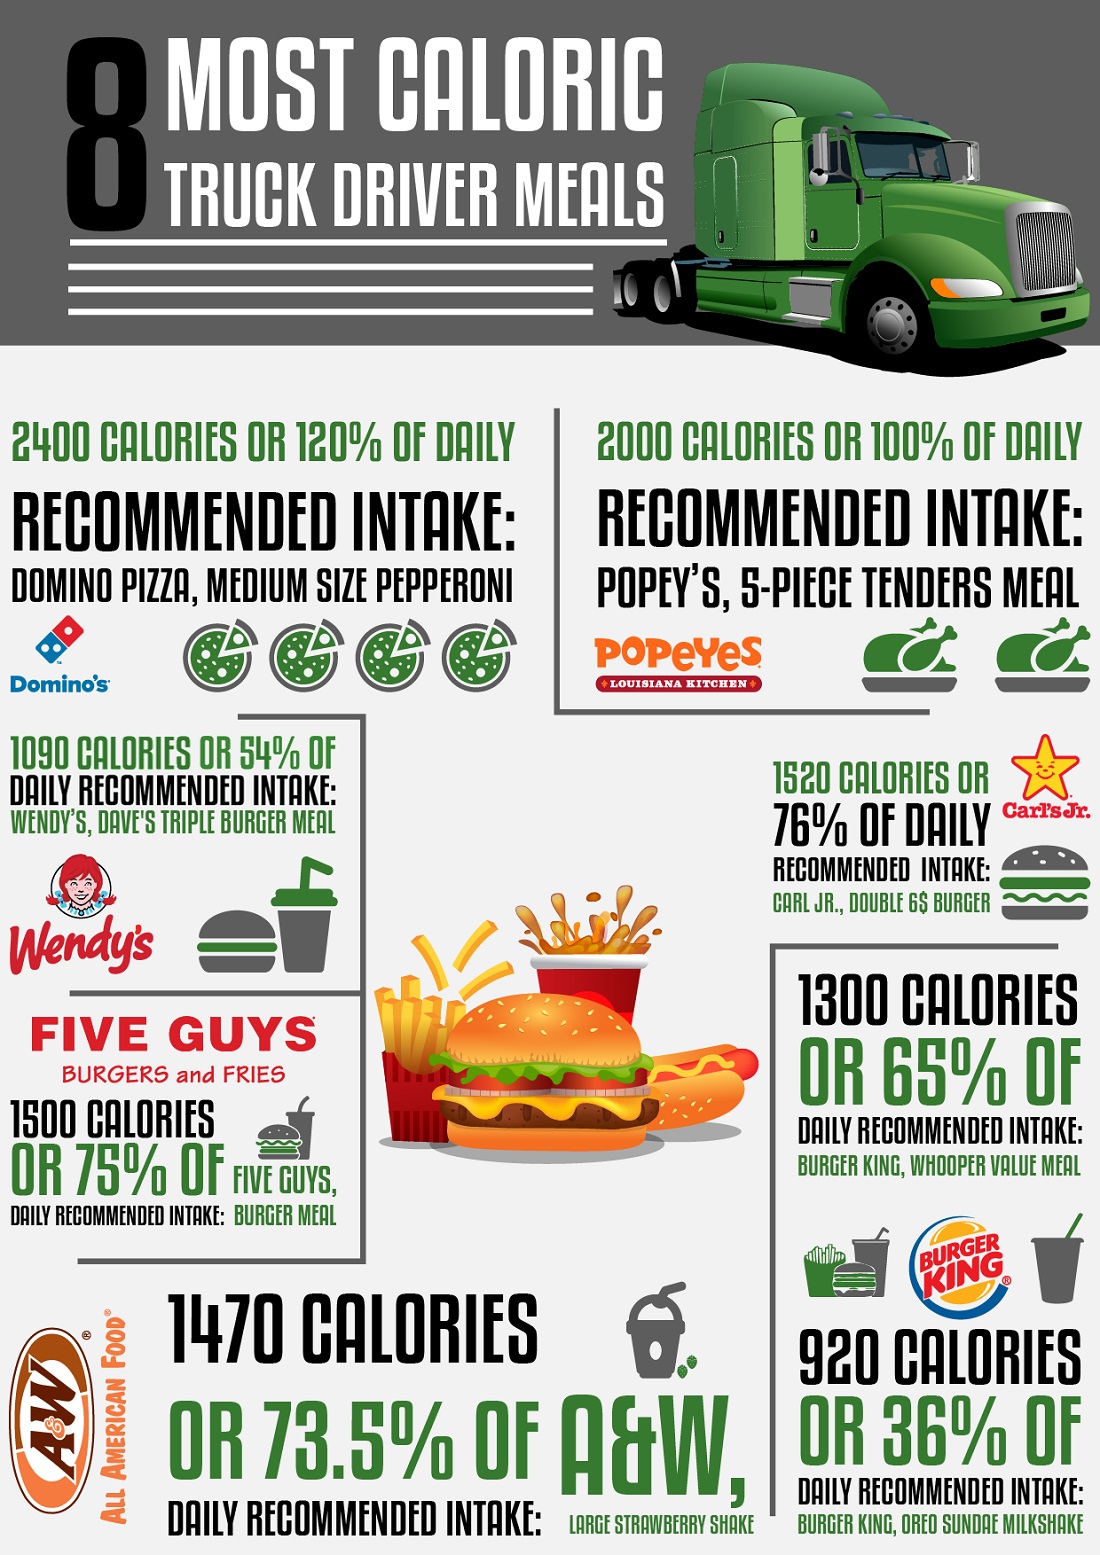 INFOGRAPHIC: 8 Most Caloric Truck Driver Meals